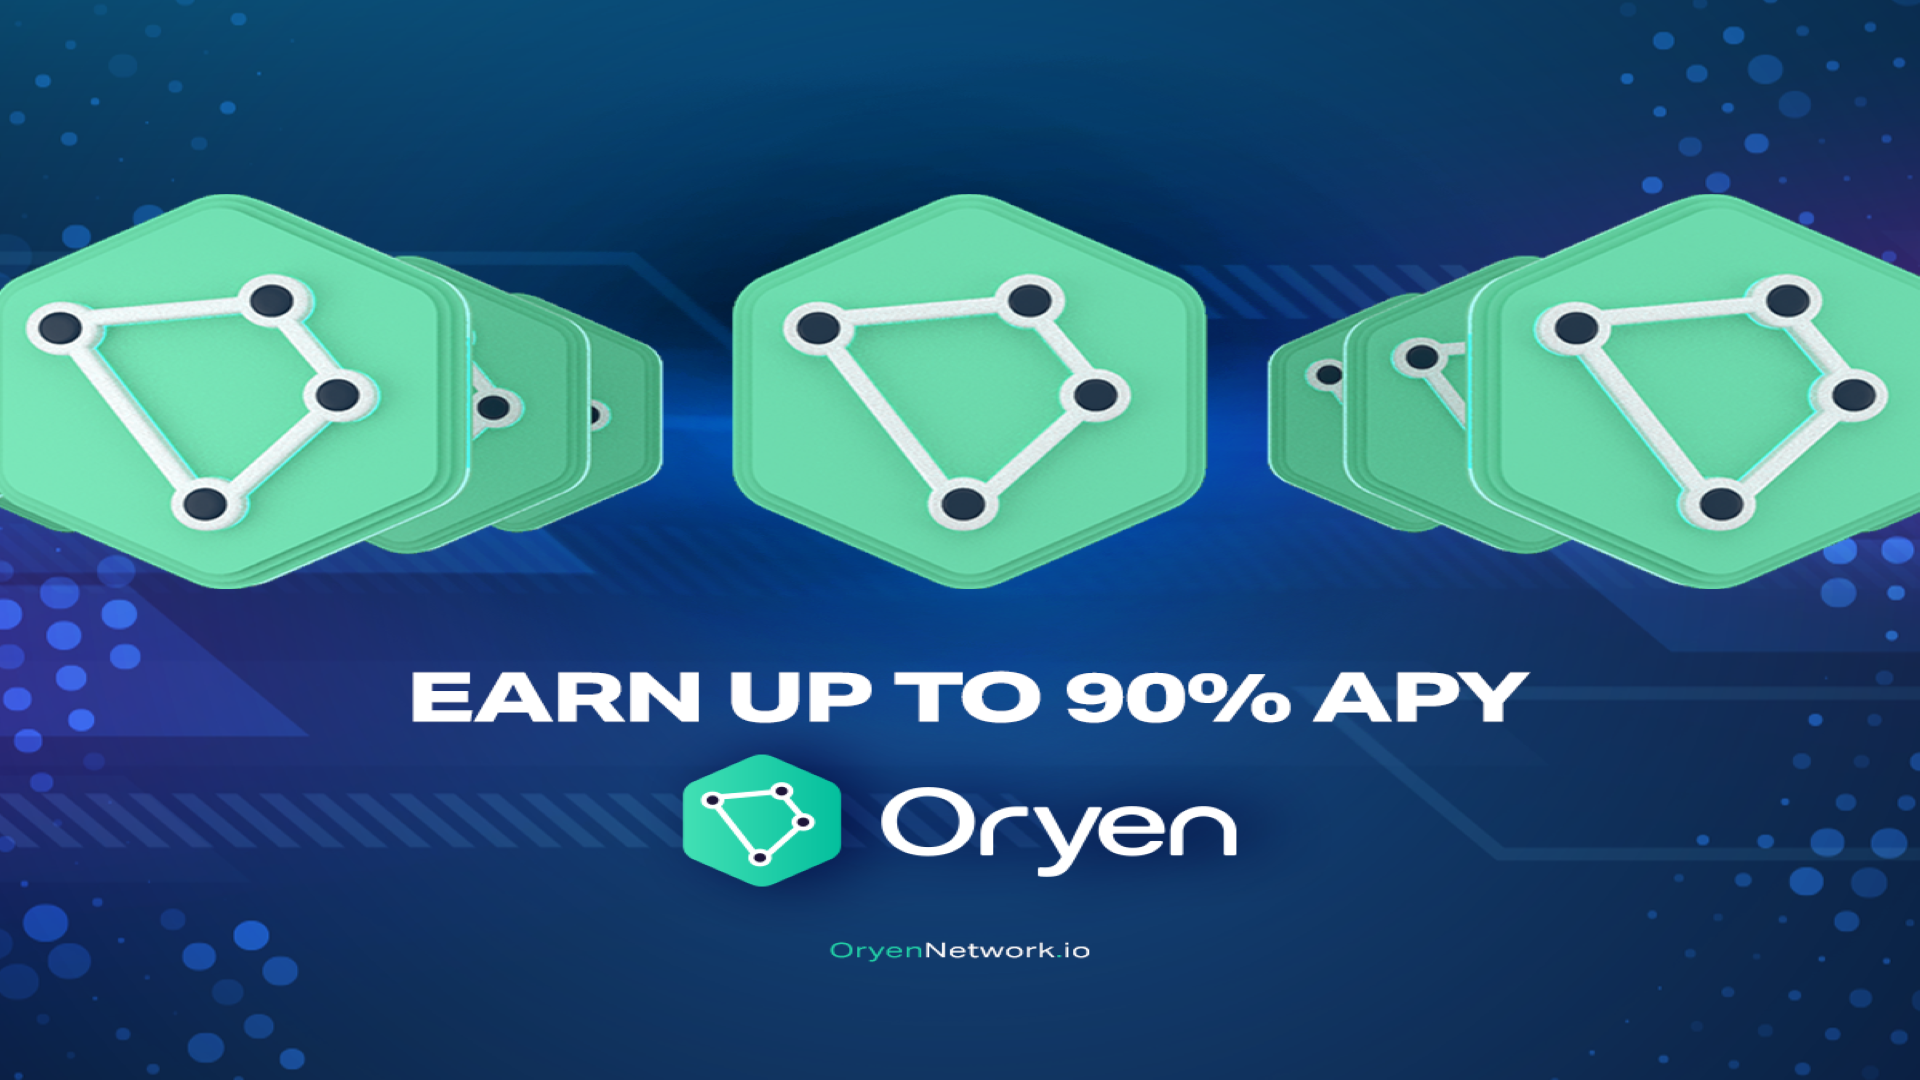 Oryen ICO generates 2x in profits for investors with Tamadoge and BNB holders starting to take notice